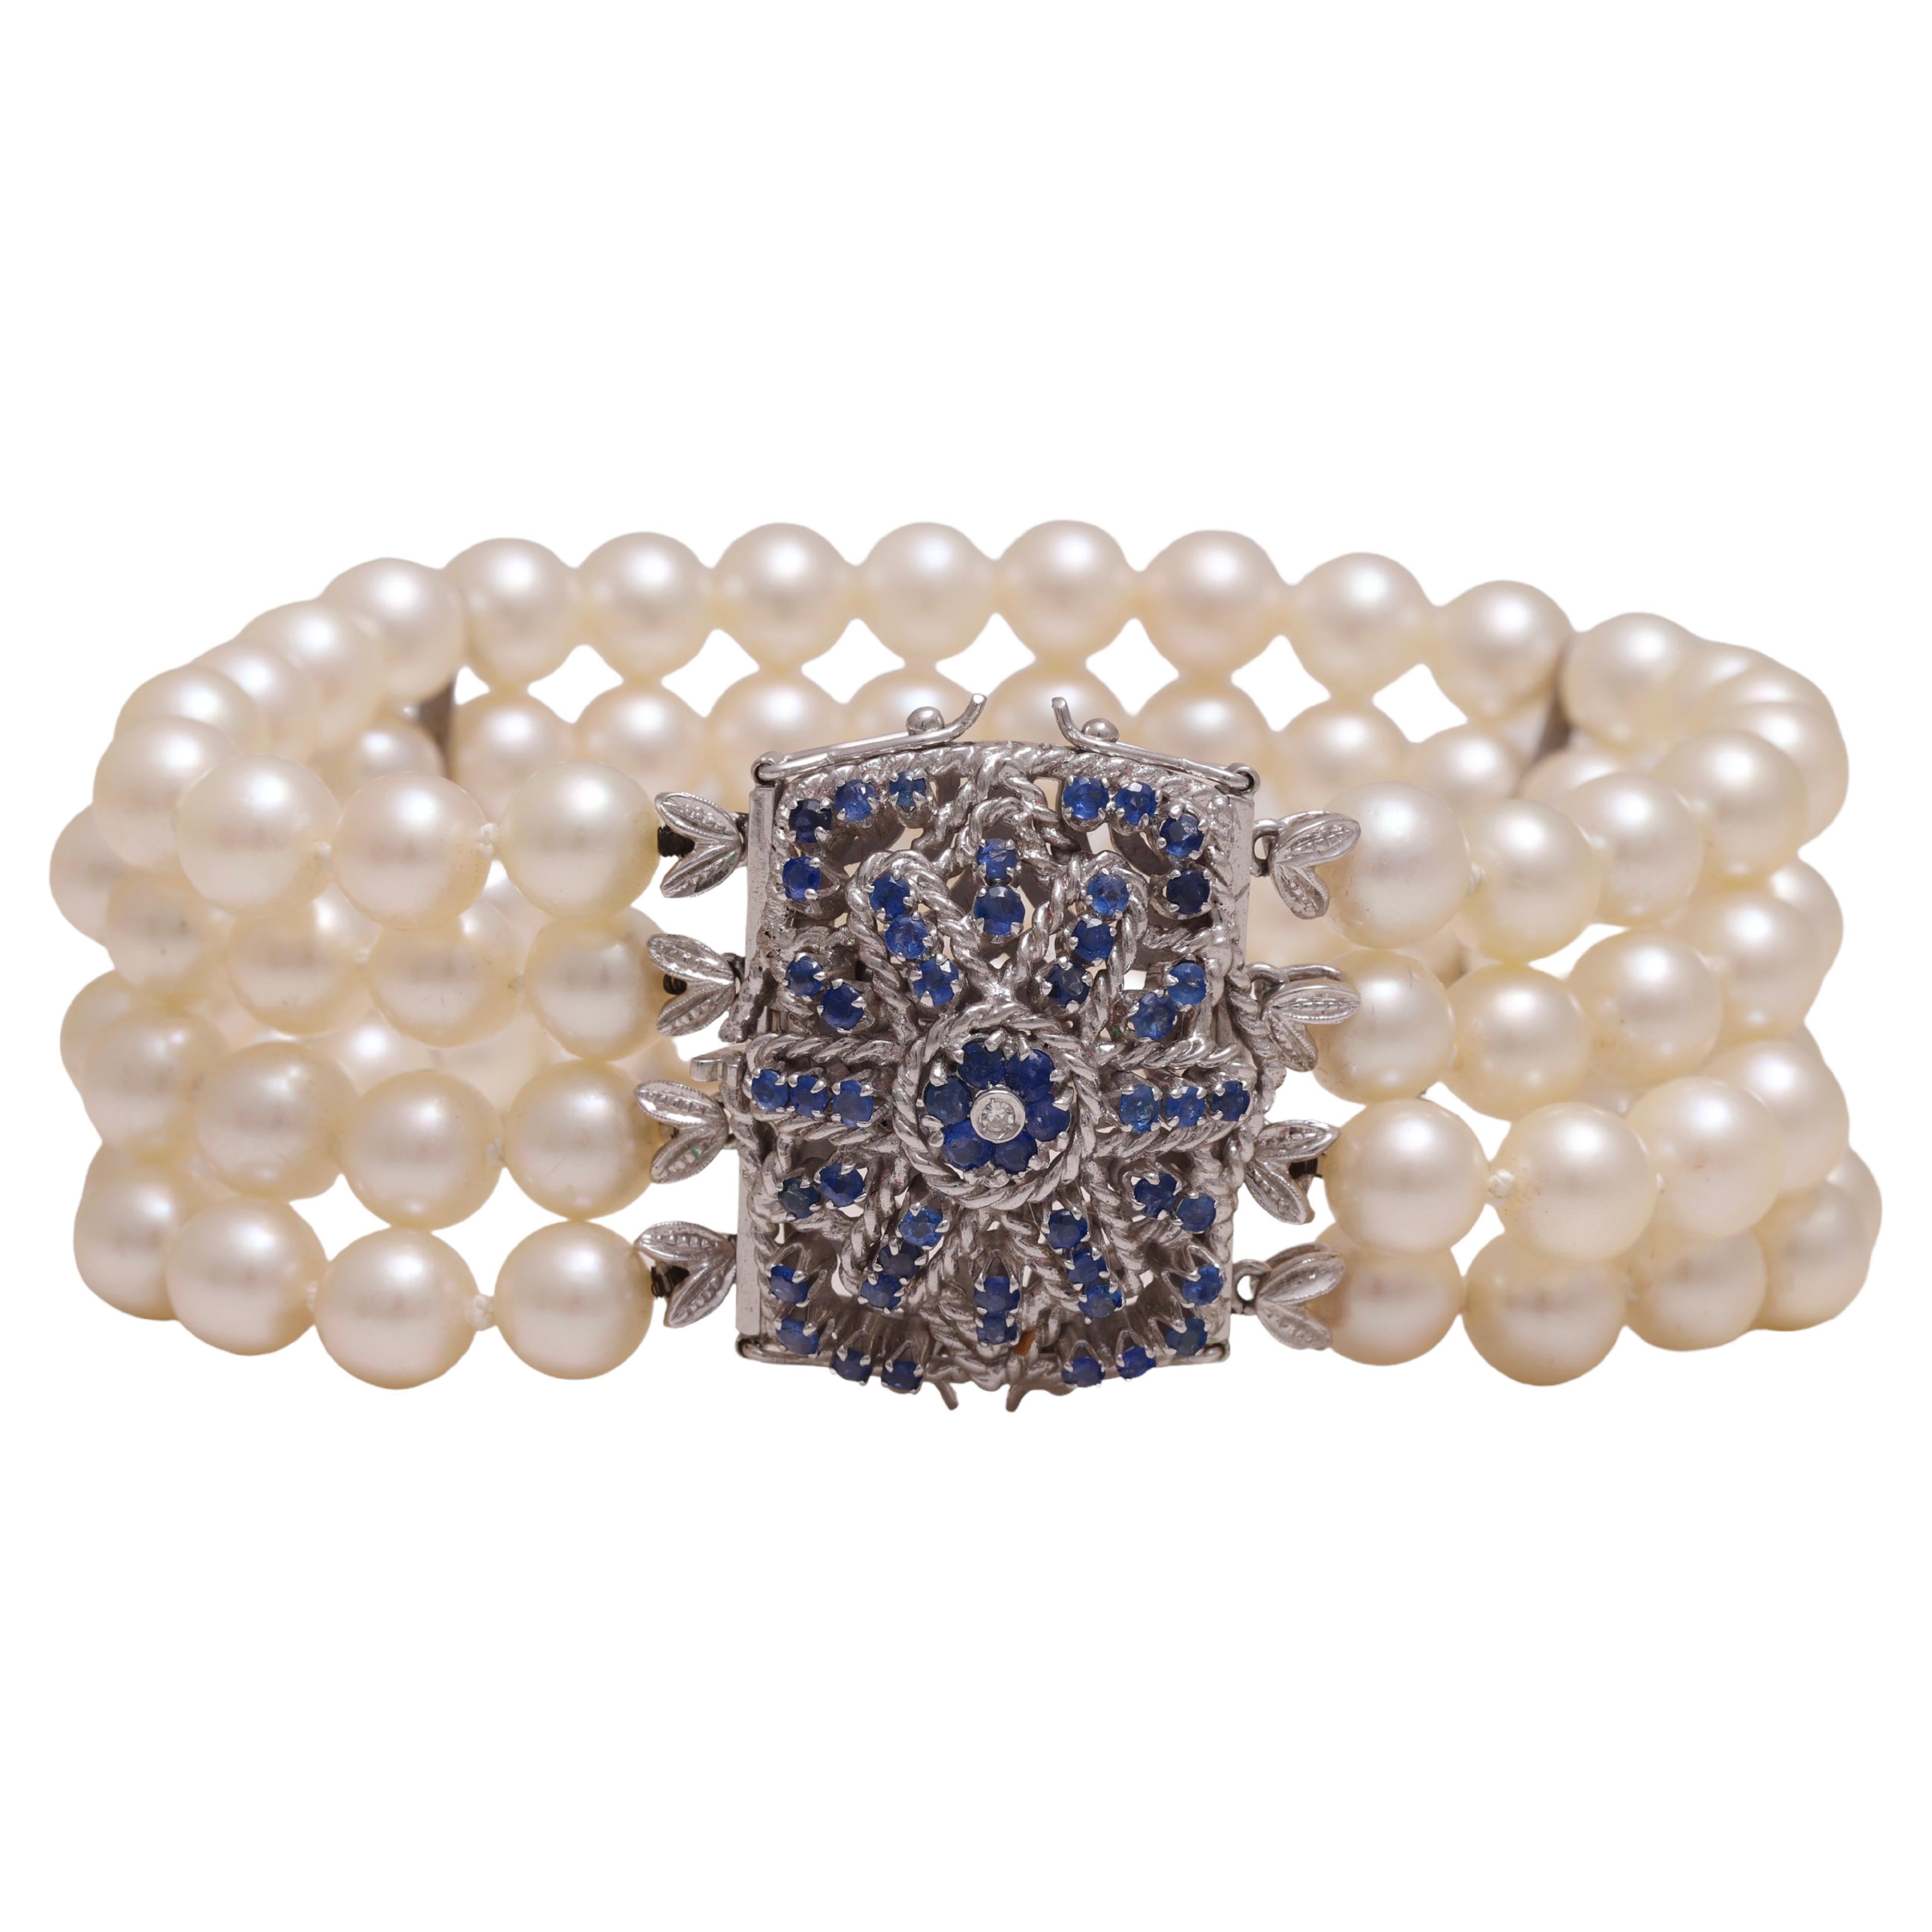 Akoya Pearl Bracelet with 18 kt. White Gold Locker with Sapphires & a Diamond For Sale